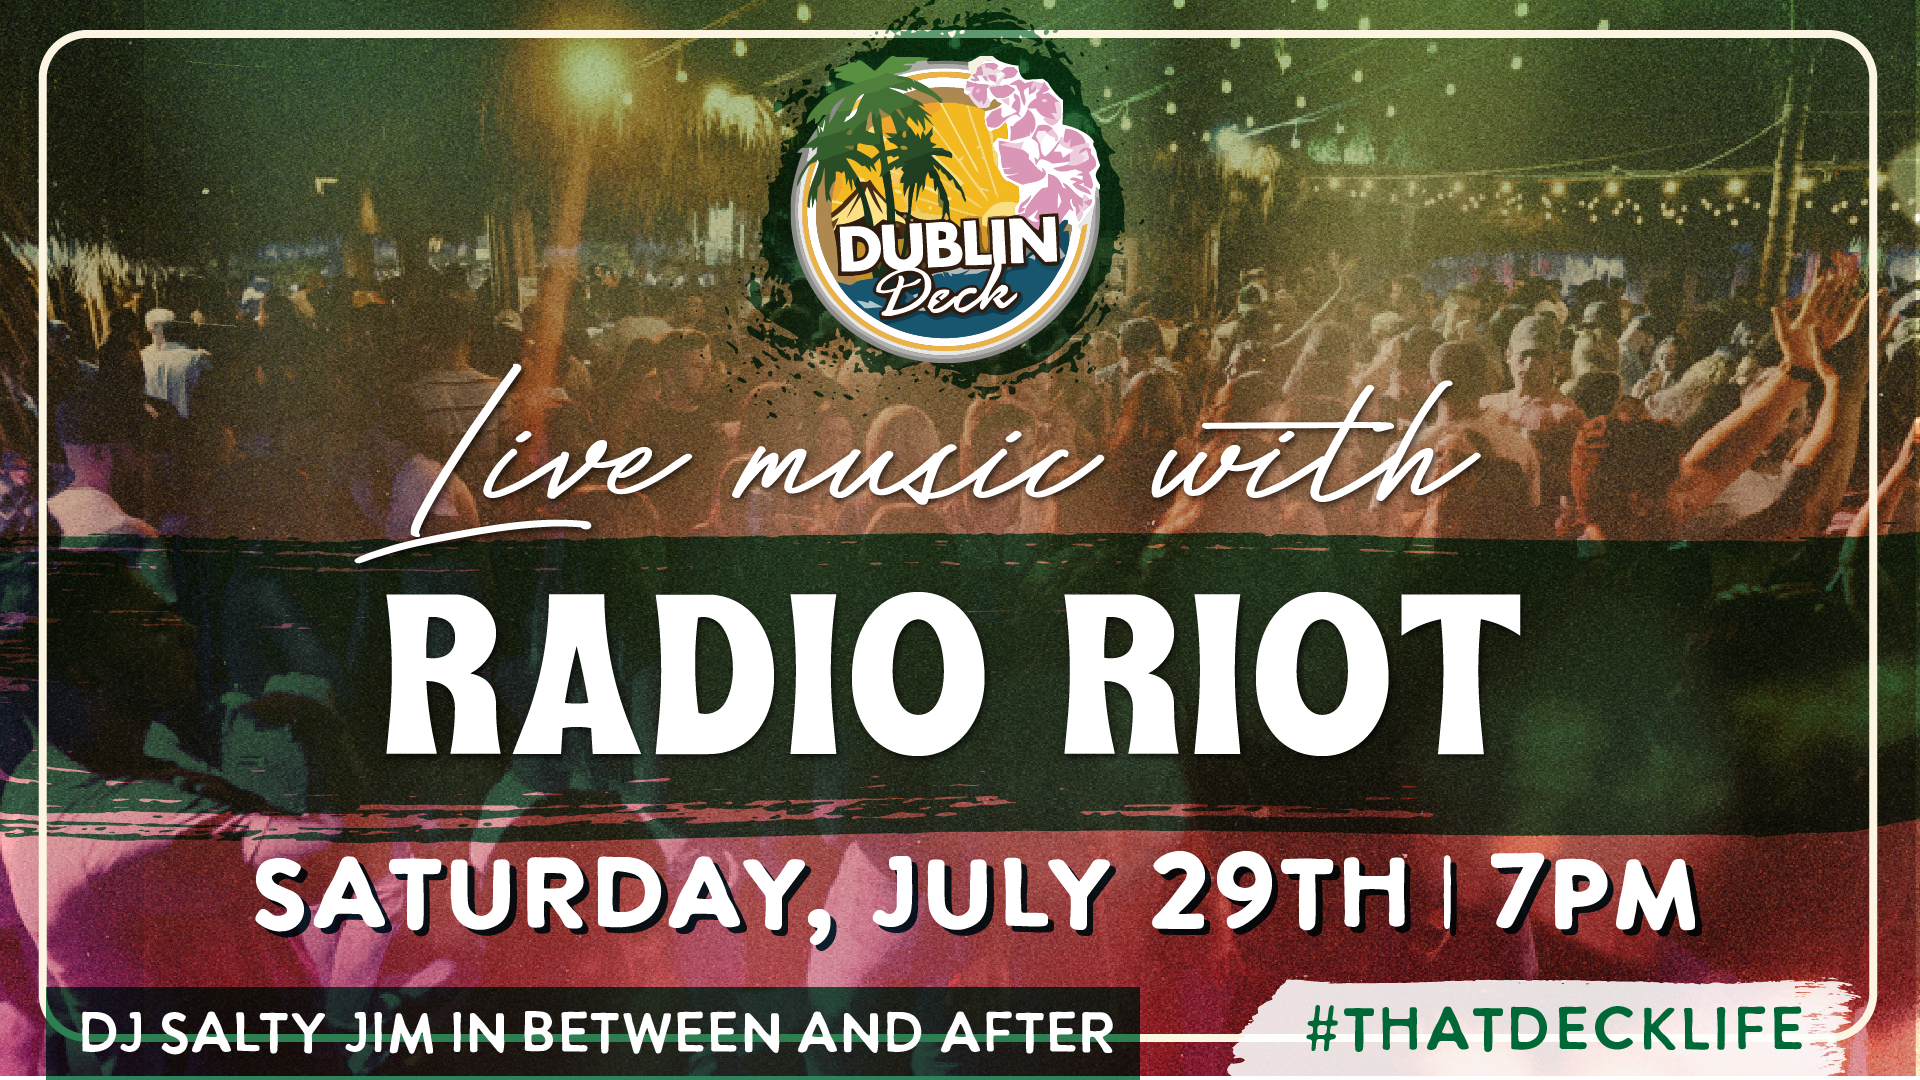 Saturday nights are better at Dublin Deck with Radio Riot! Music begins at 7PM